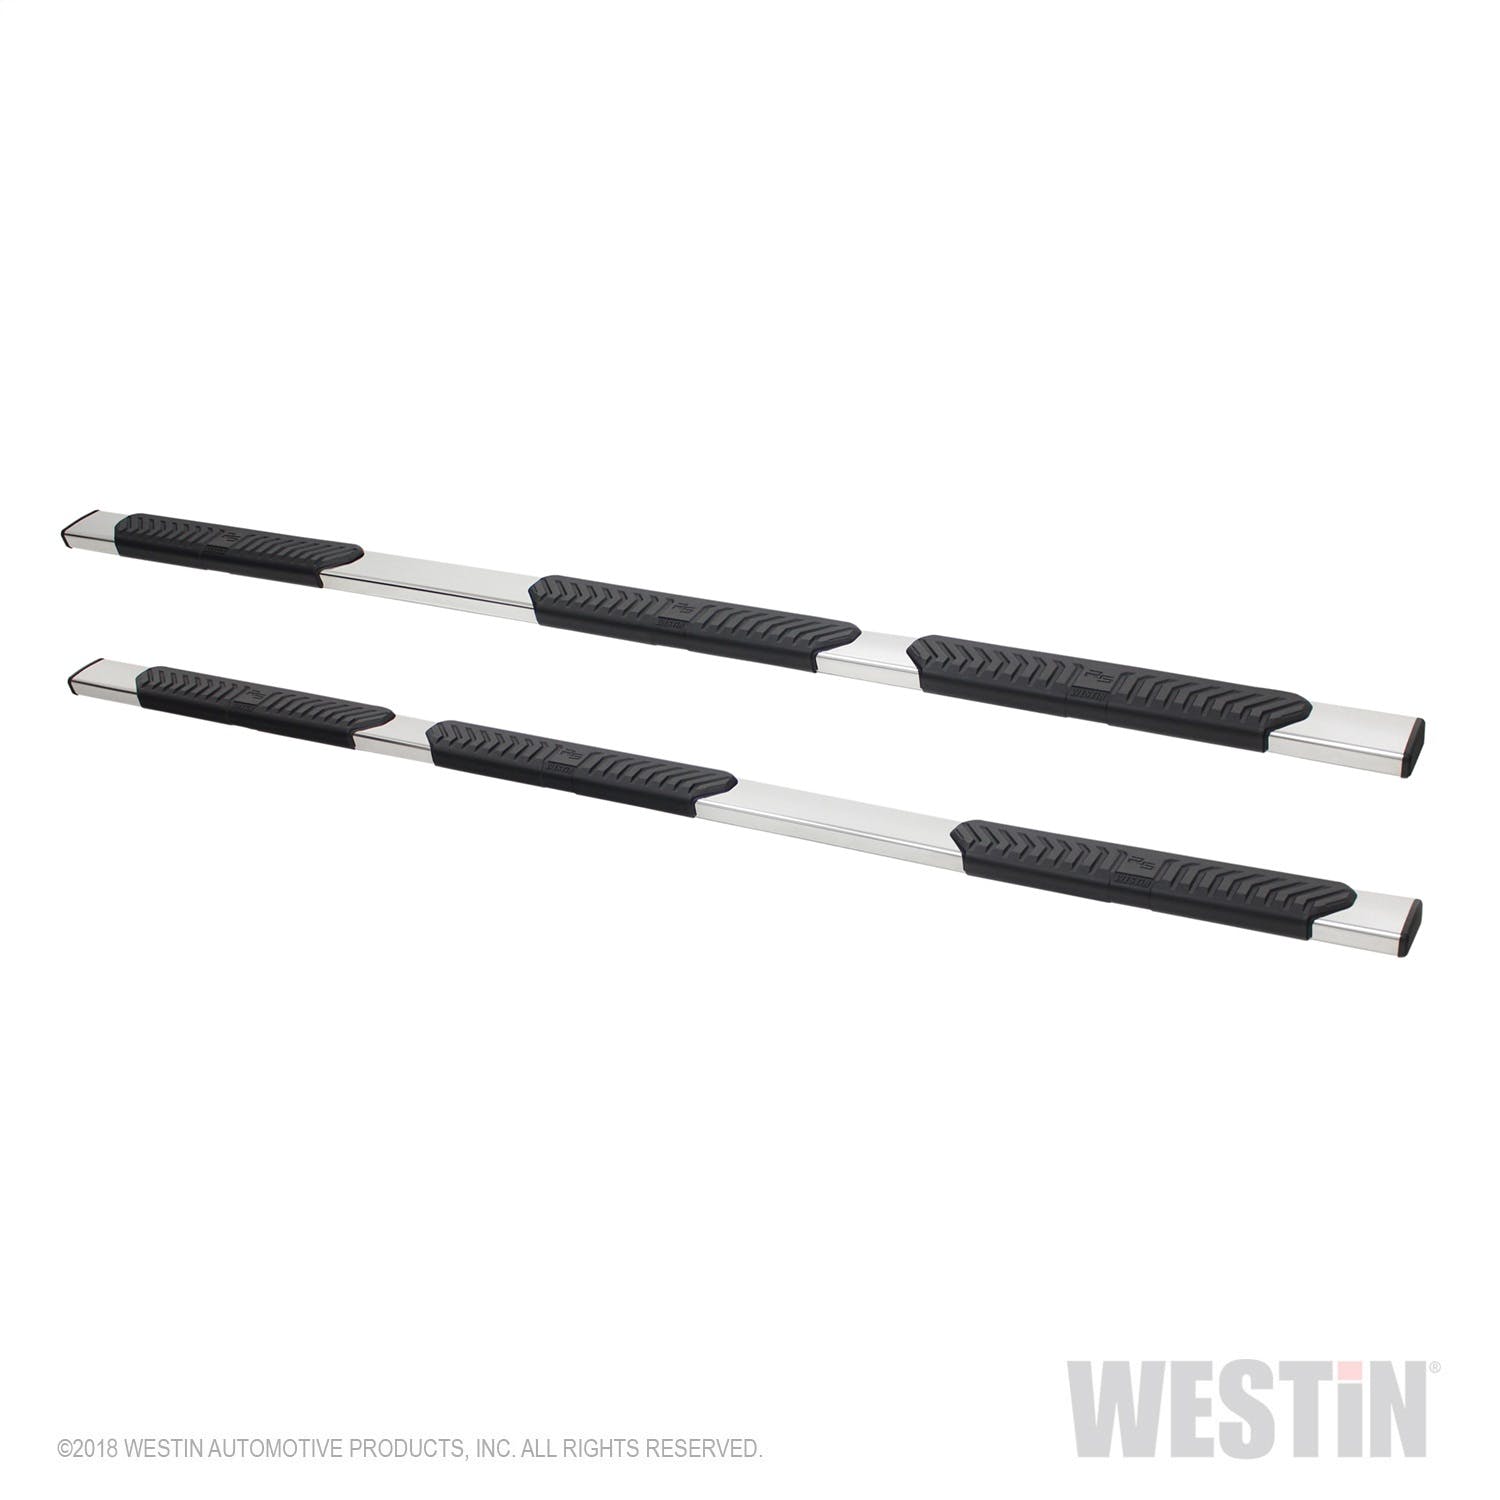 Westin Automotive 28-534570 R5 M-Series Wheel-to-Wheel Nerf Step Bars Polished Stainless